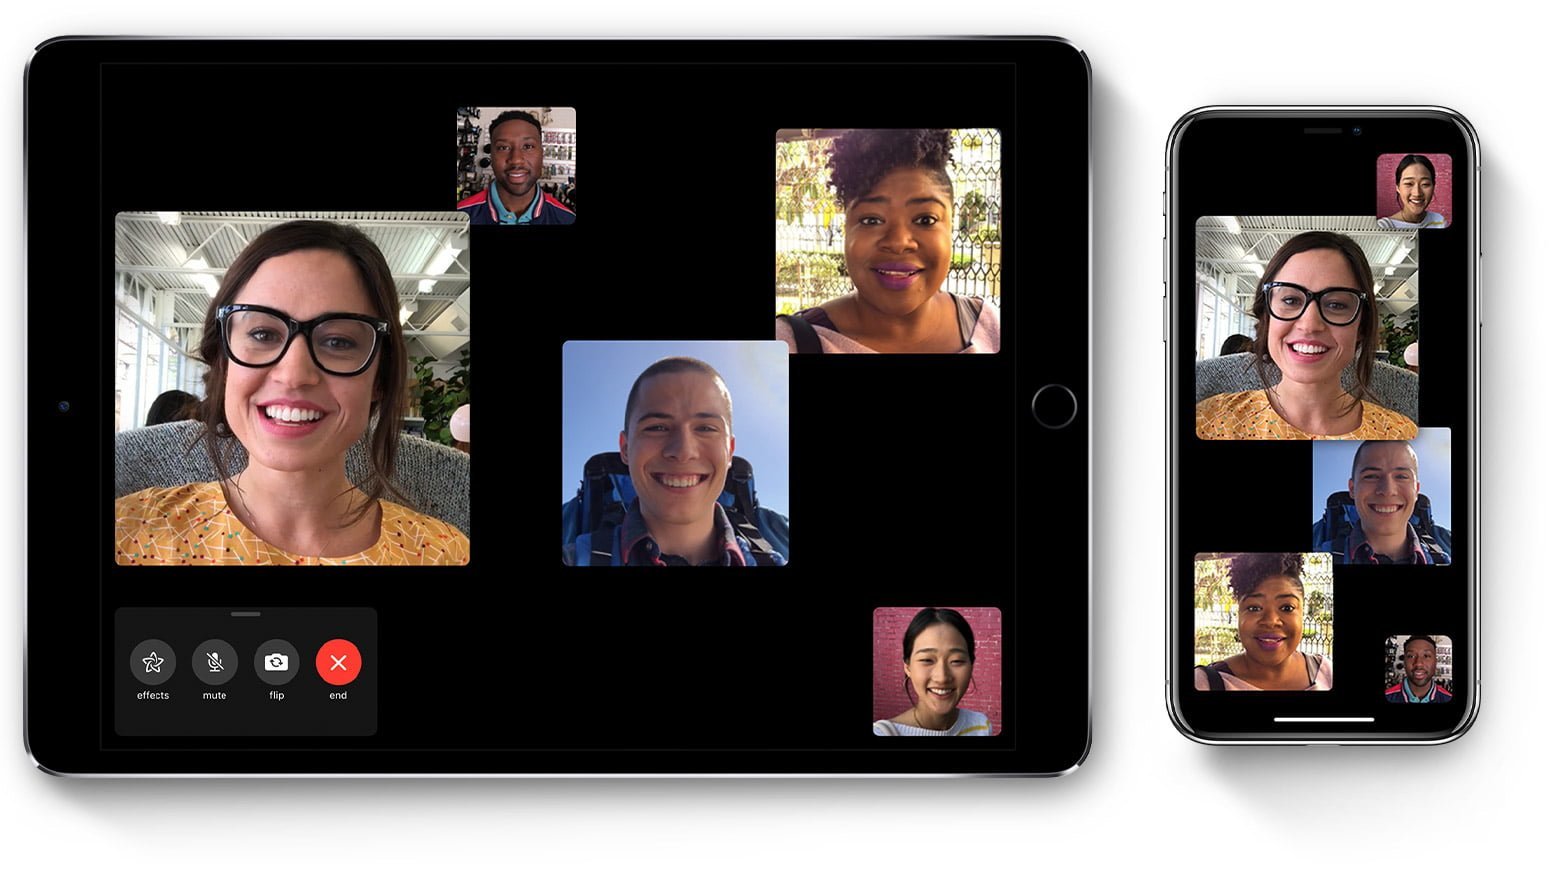 Group FaceTime bug Privacy Issue